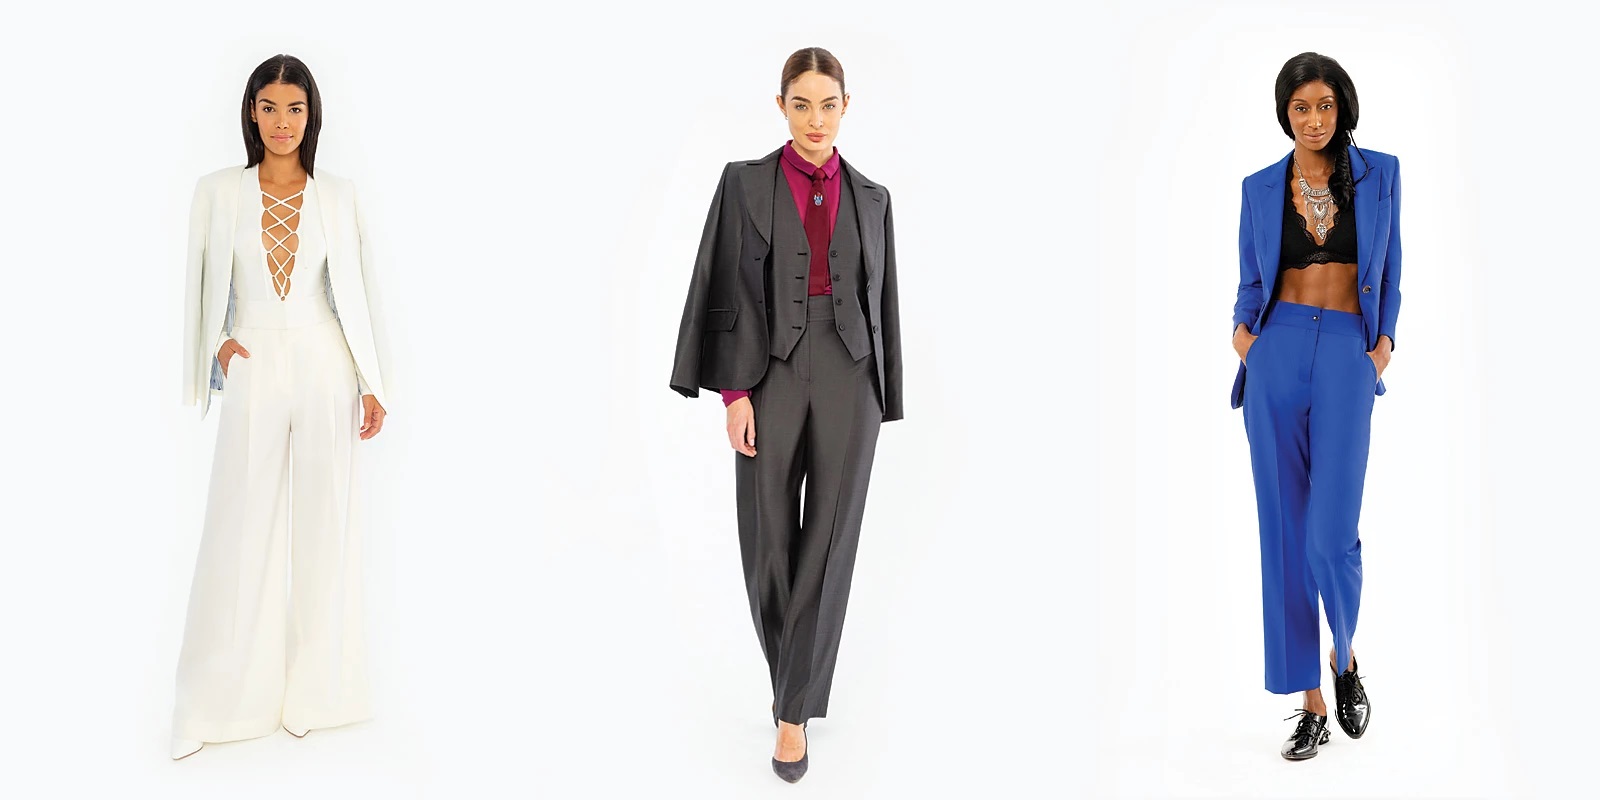 Customized pantsuits for tall women are better than the ready-made pantsuits